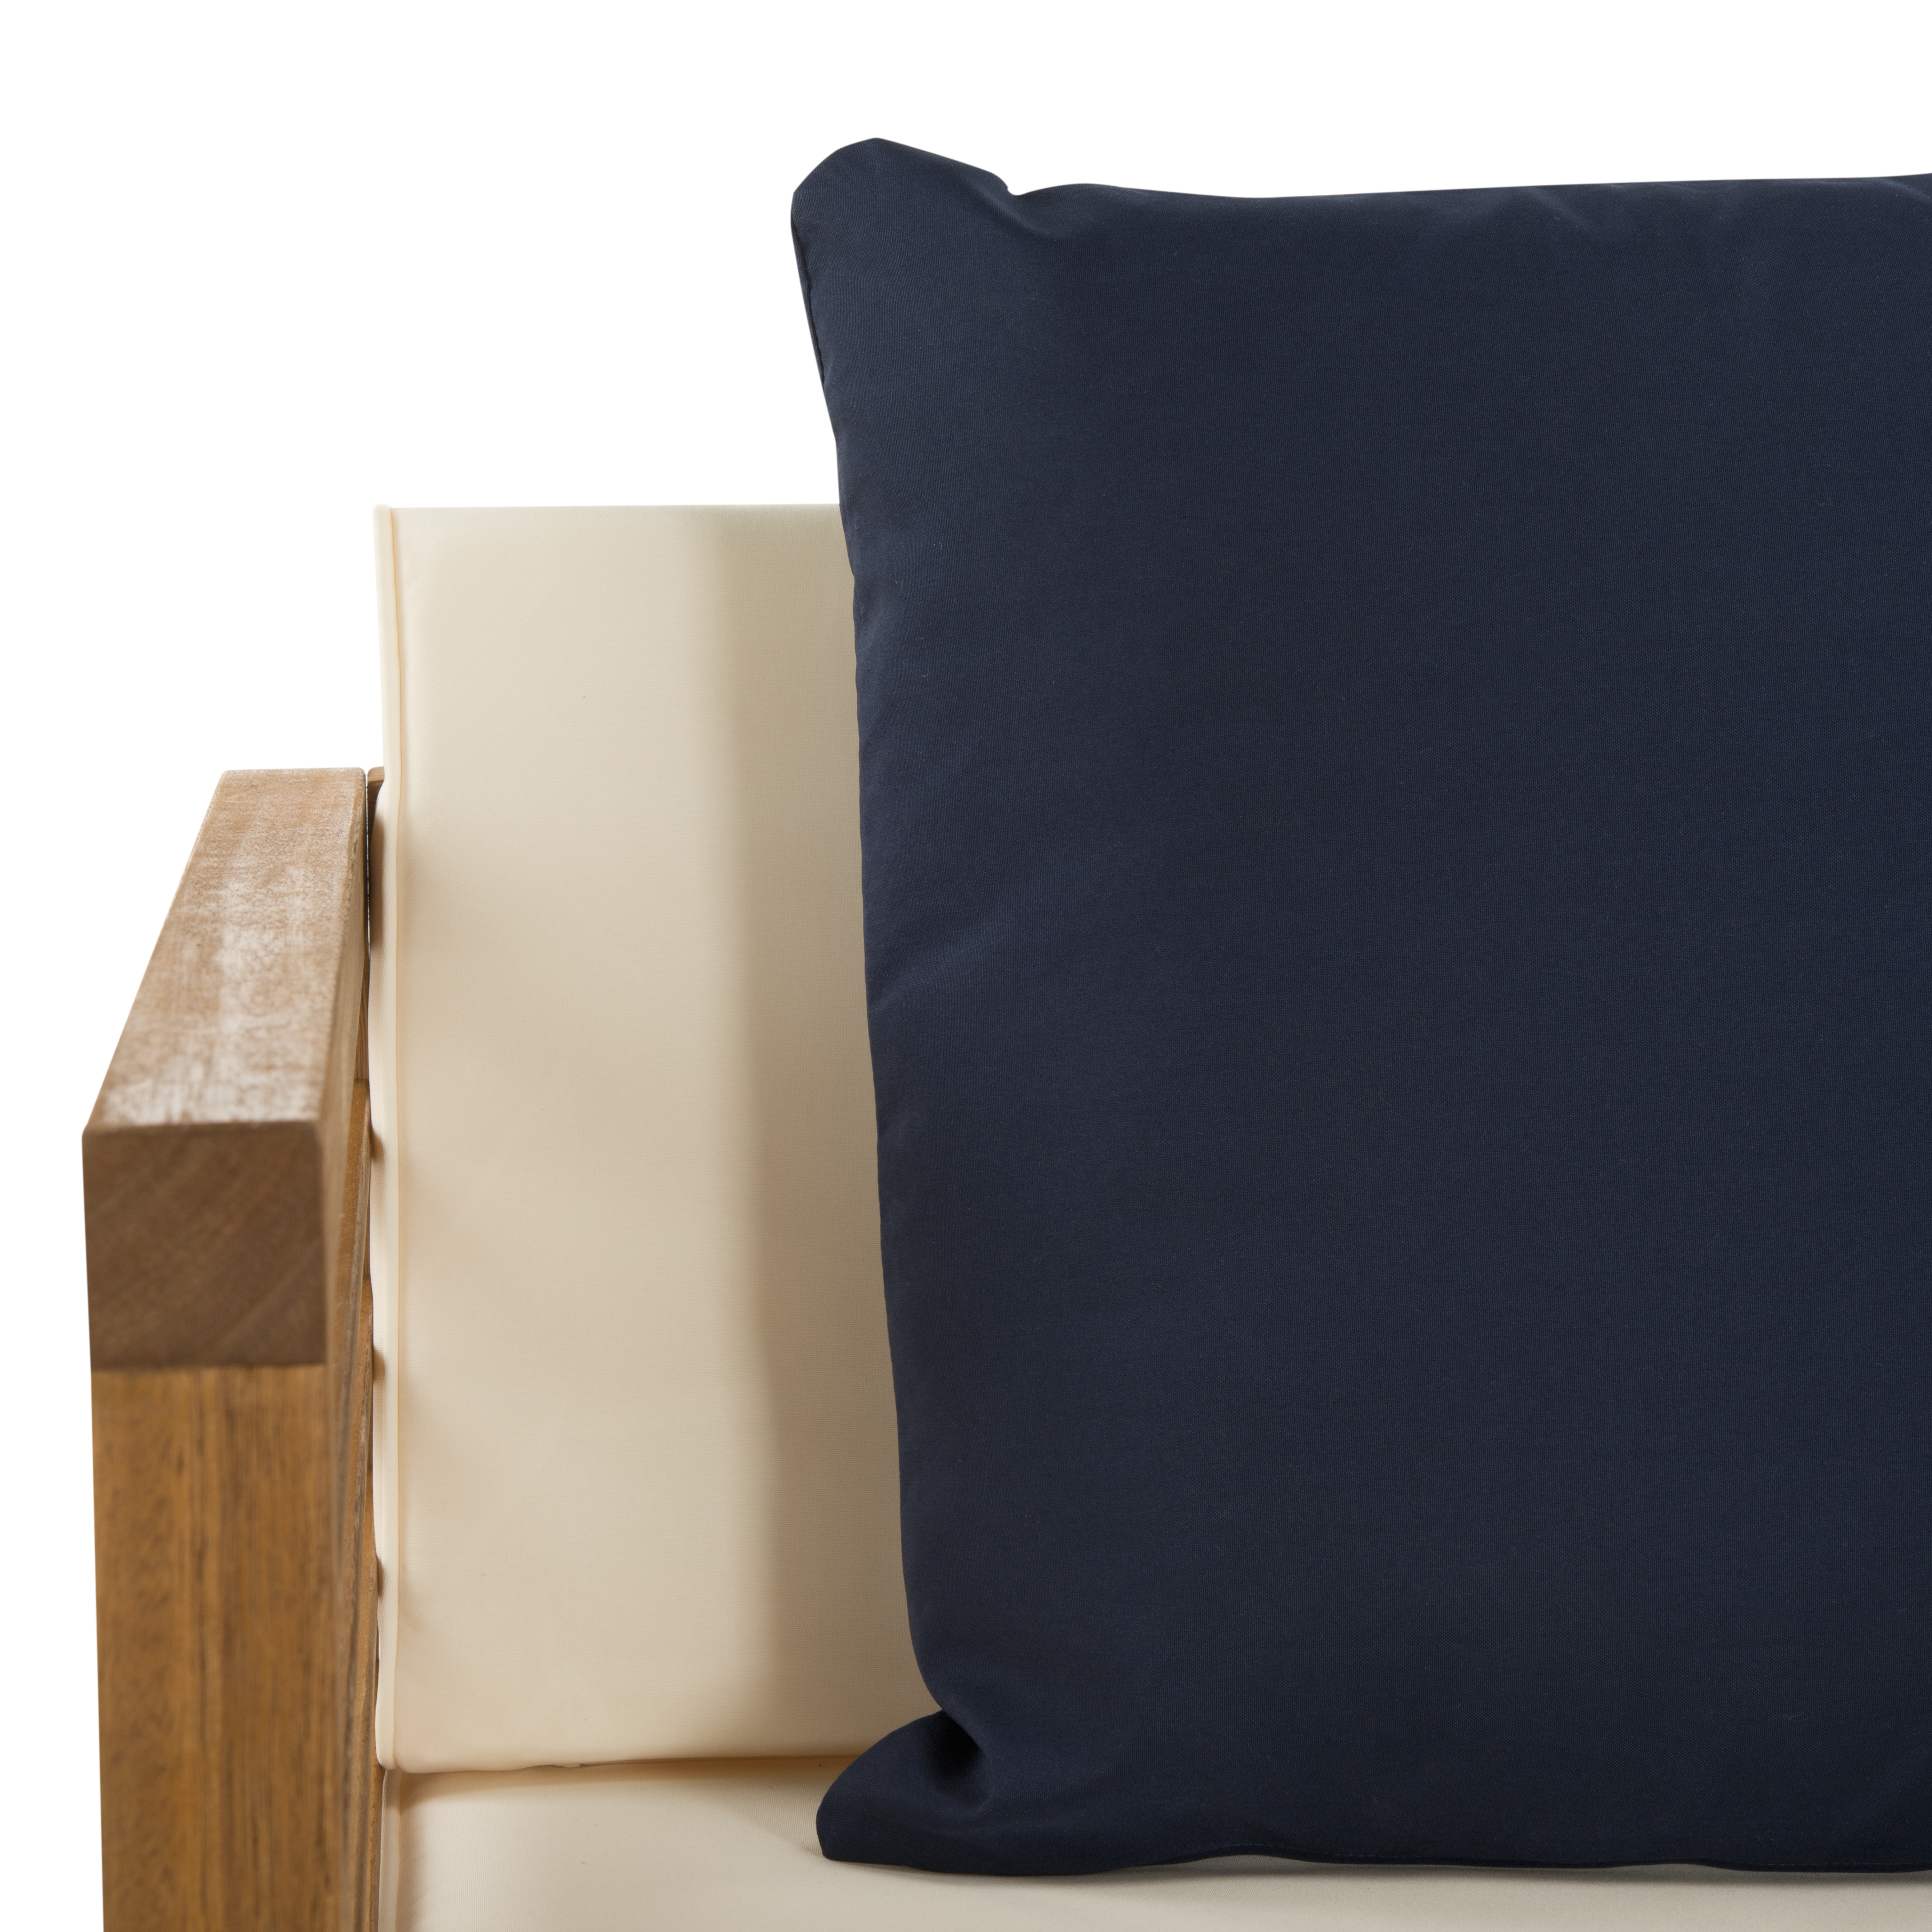 Alda 4 Piece Outdoor Set With Accent Pillows - Natural/White/Navy - Arlo Home - Image 1